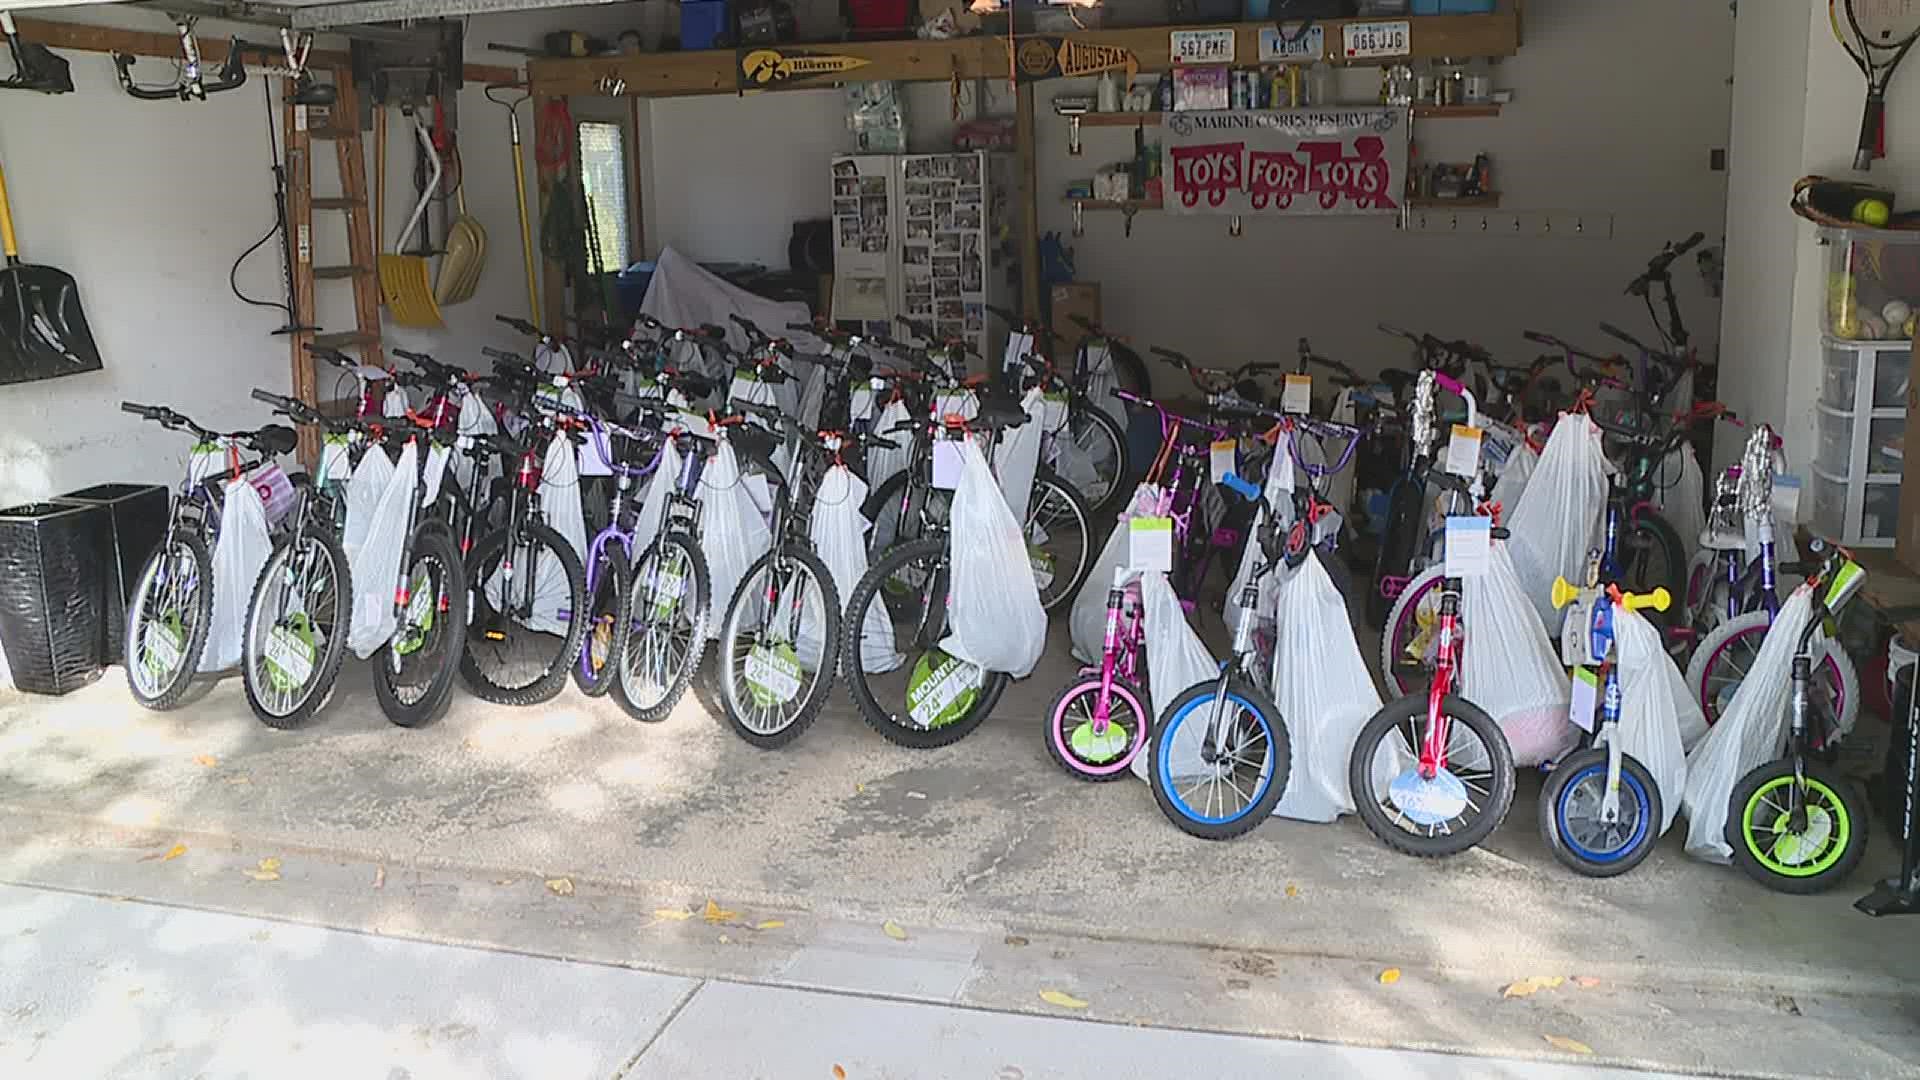 The Quad Cities Bike Club organized a bike drive six years ago called 'Bikes for Tykes' to donate to Toys for Tots.